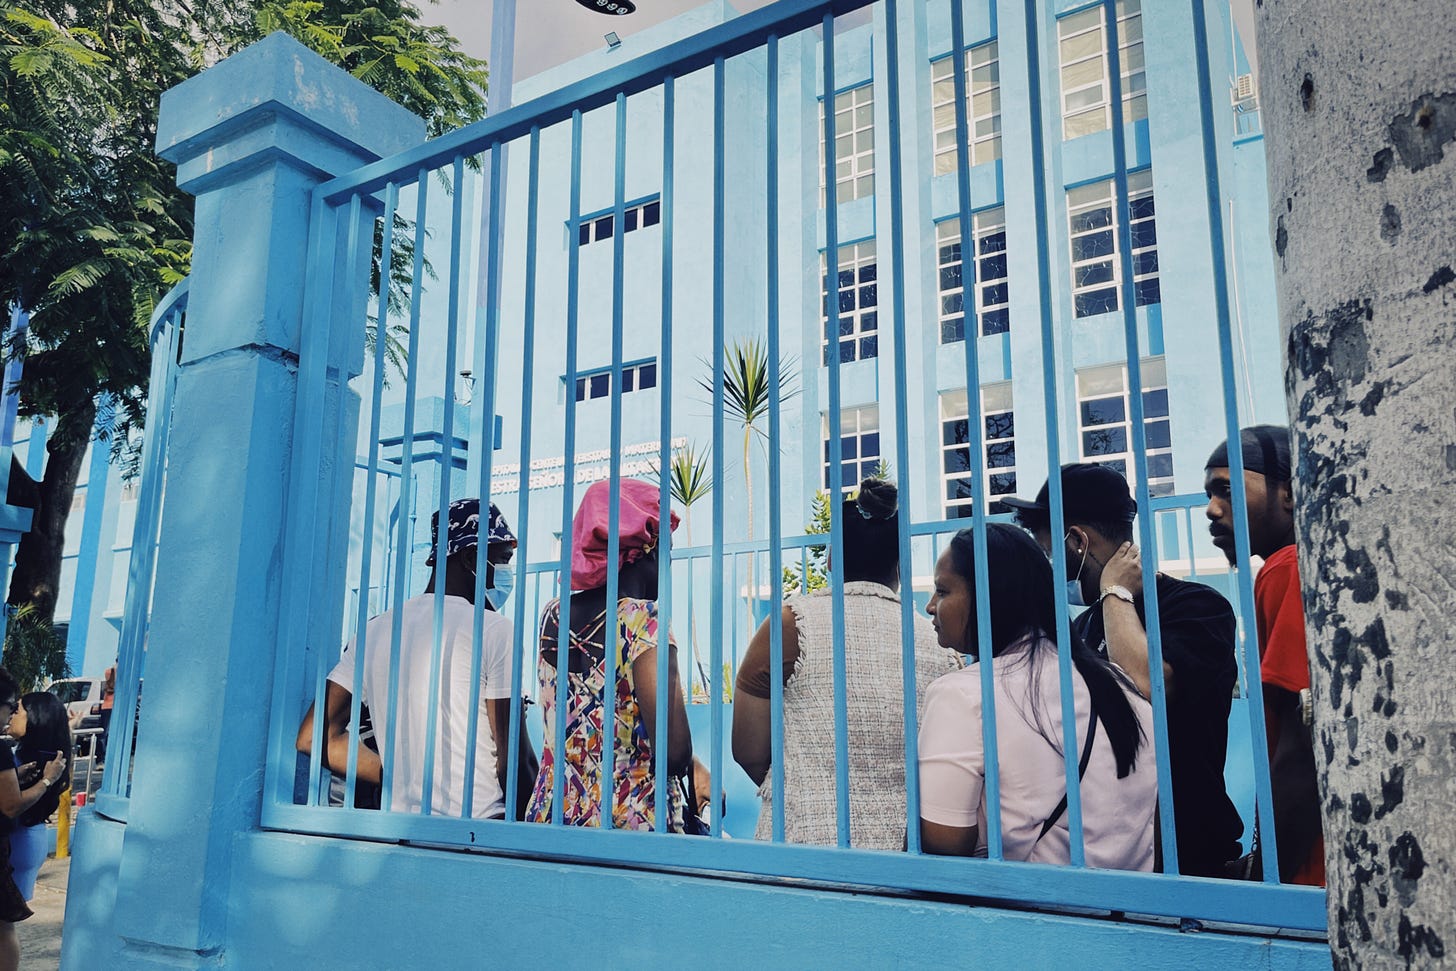 Black people wait in line in a fenced-in area outside a hospital in Santo Domingo. Both the hospital, visible in the background, and the fence, in the foreground, are painted bright blue.